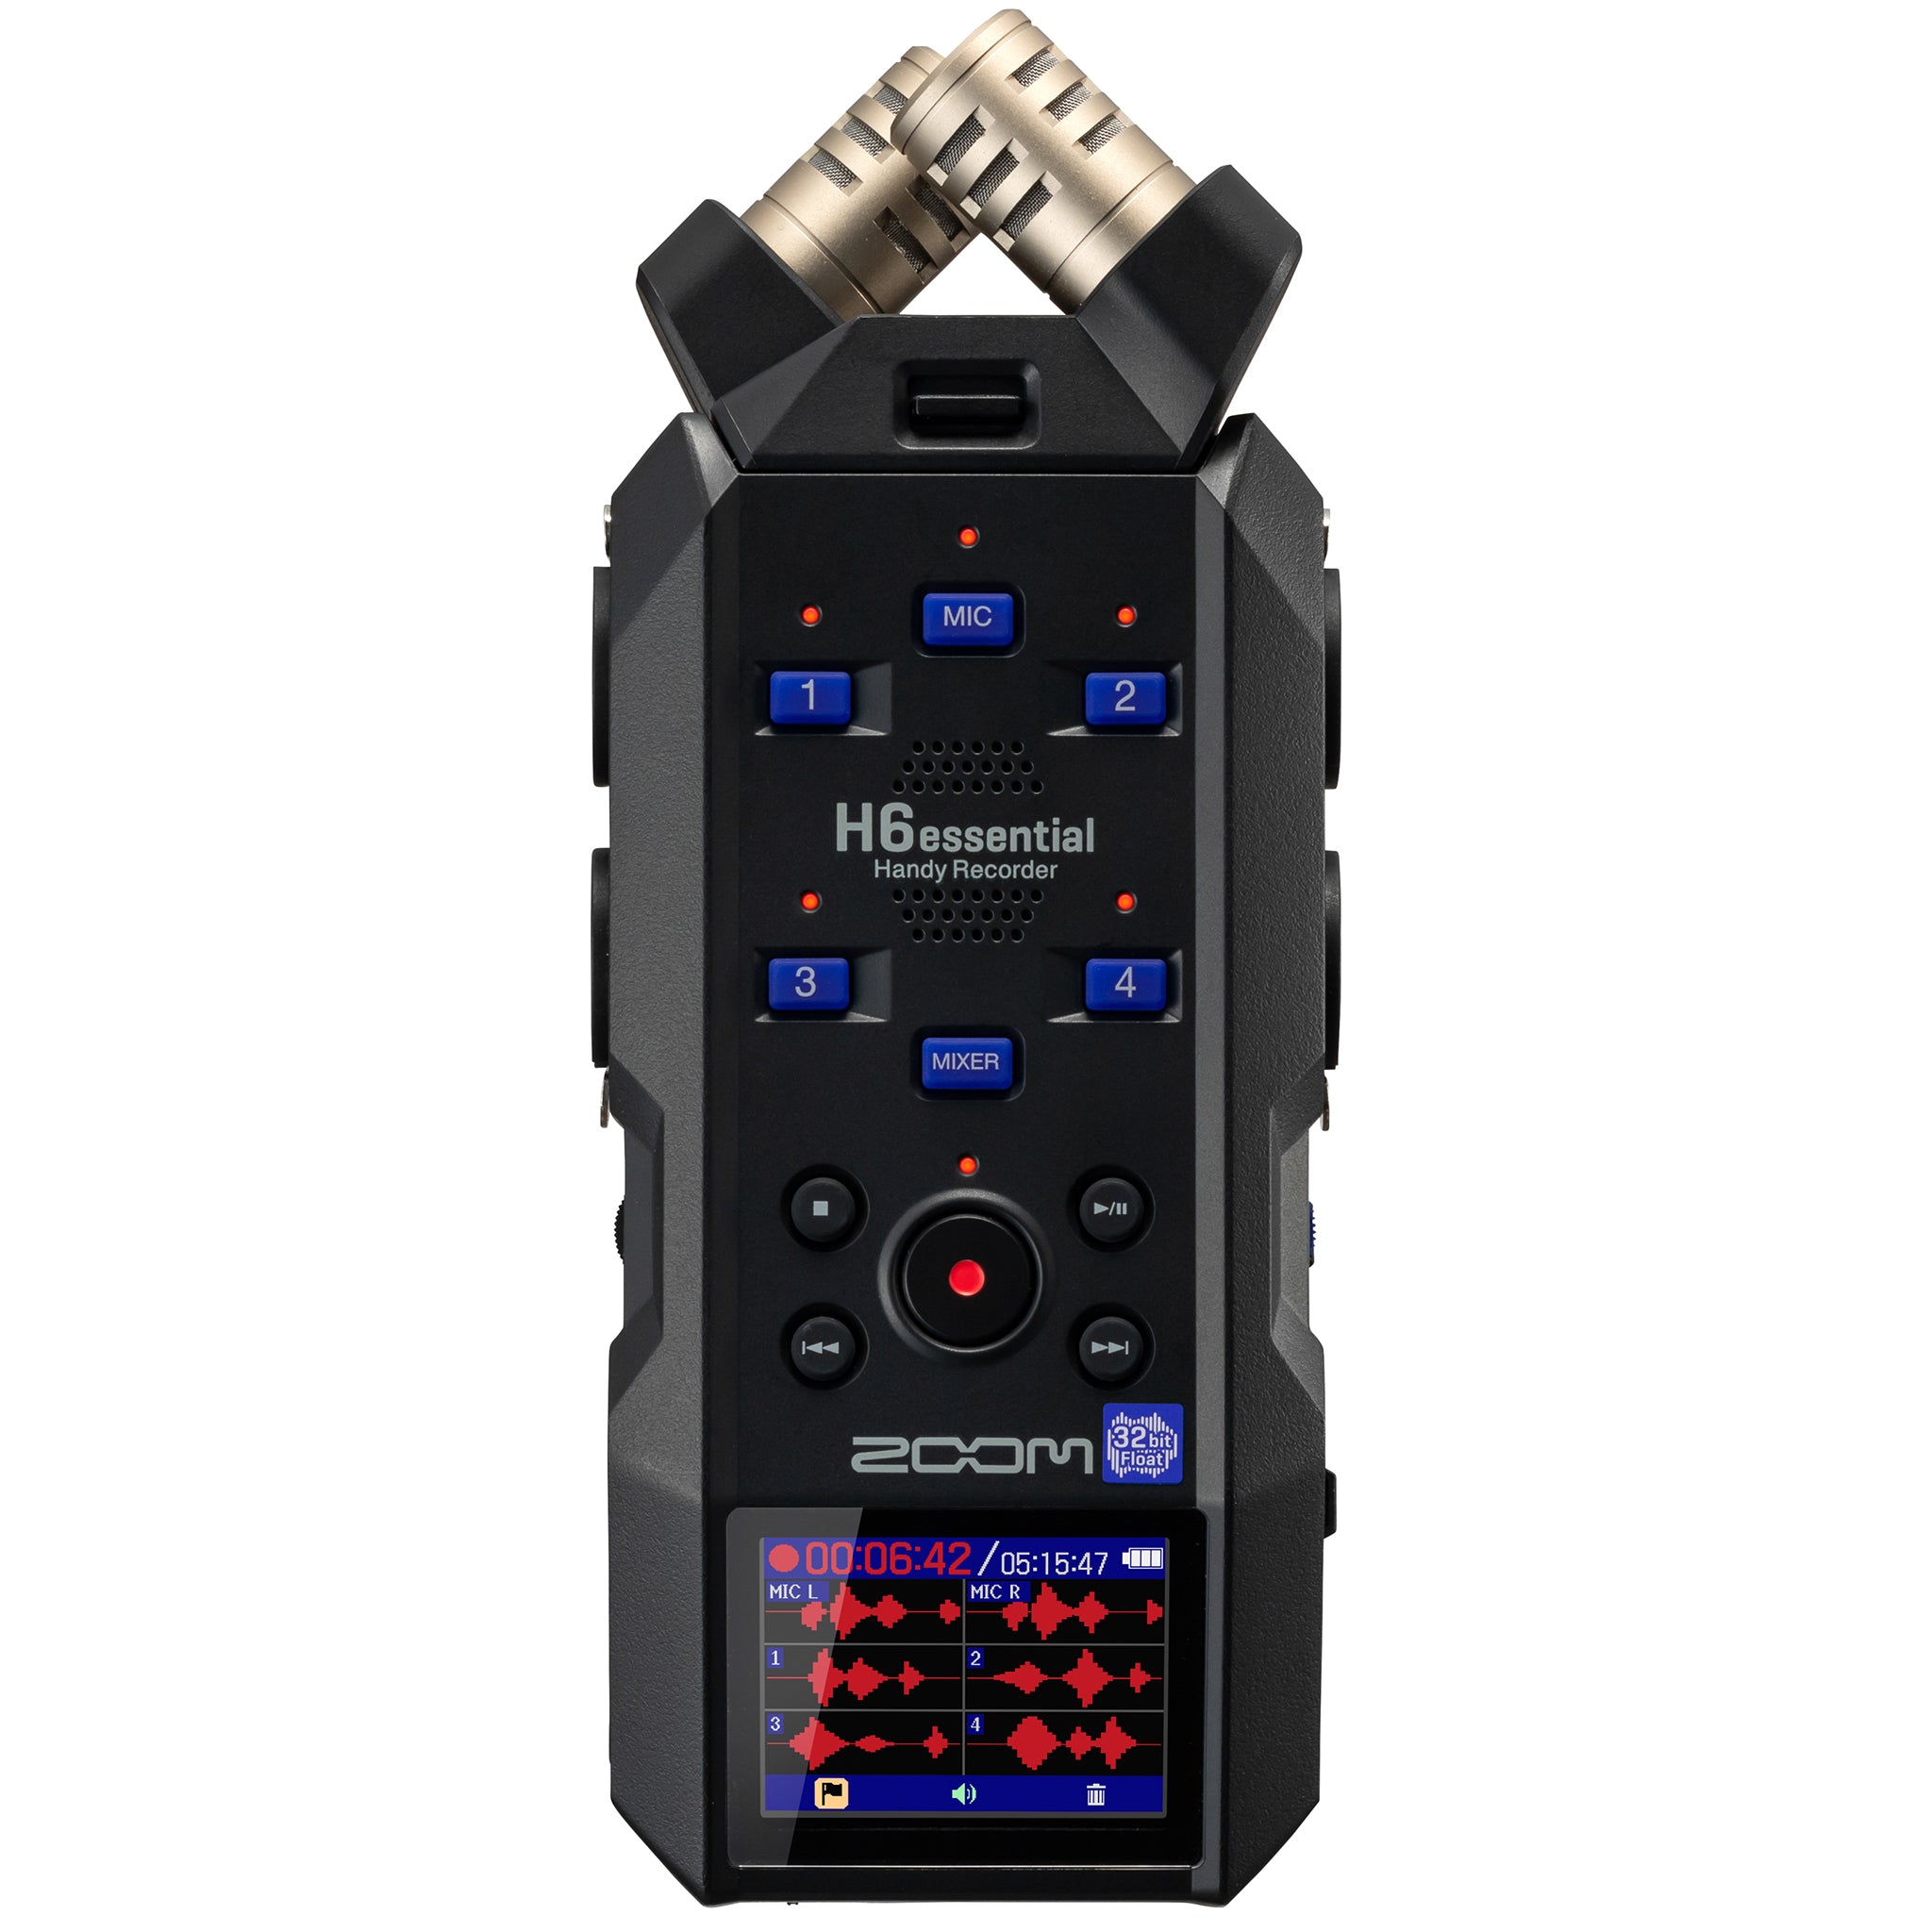 Newly Released Zoom Essential Line: H1, H4 and H6 with 32-Bit